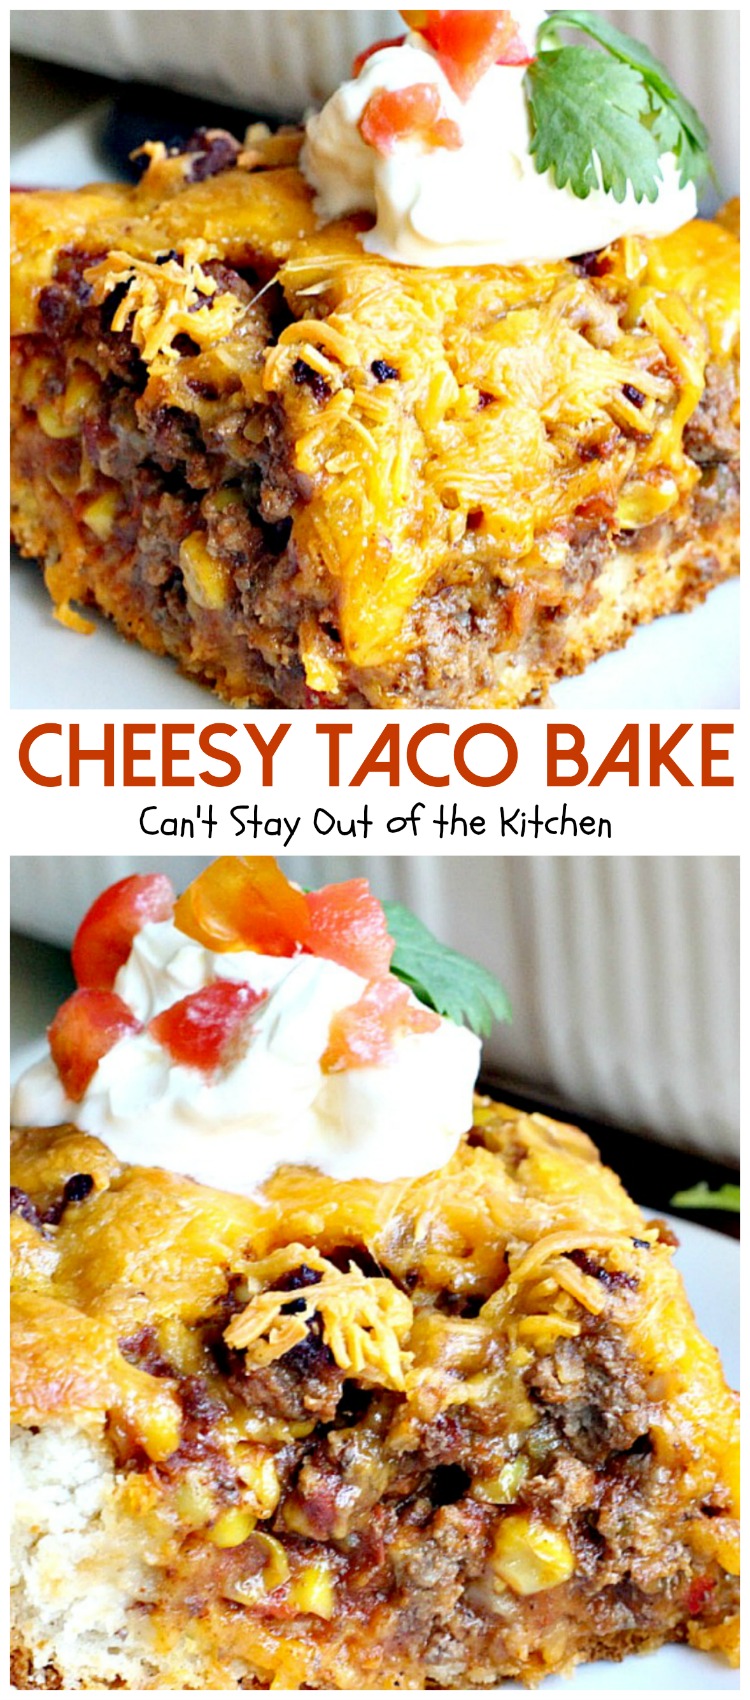 Cheesy Taco Bake Collage – Can't Stay Out of the Kitchen